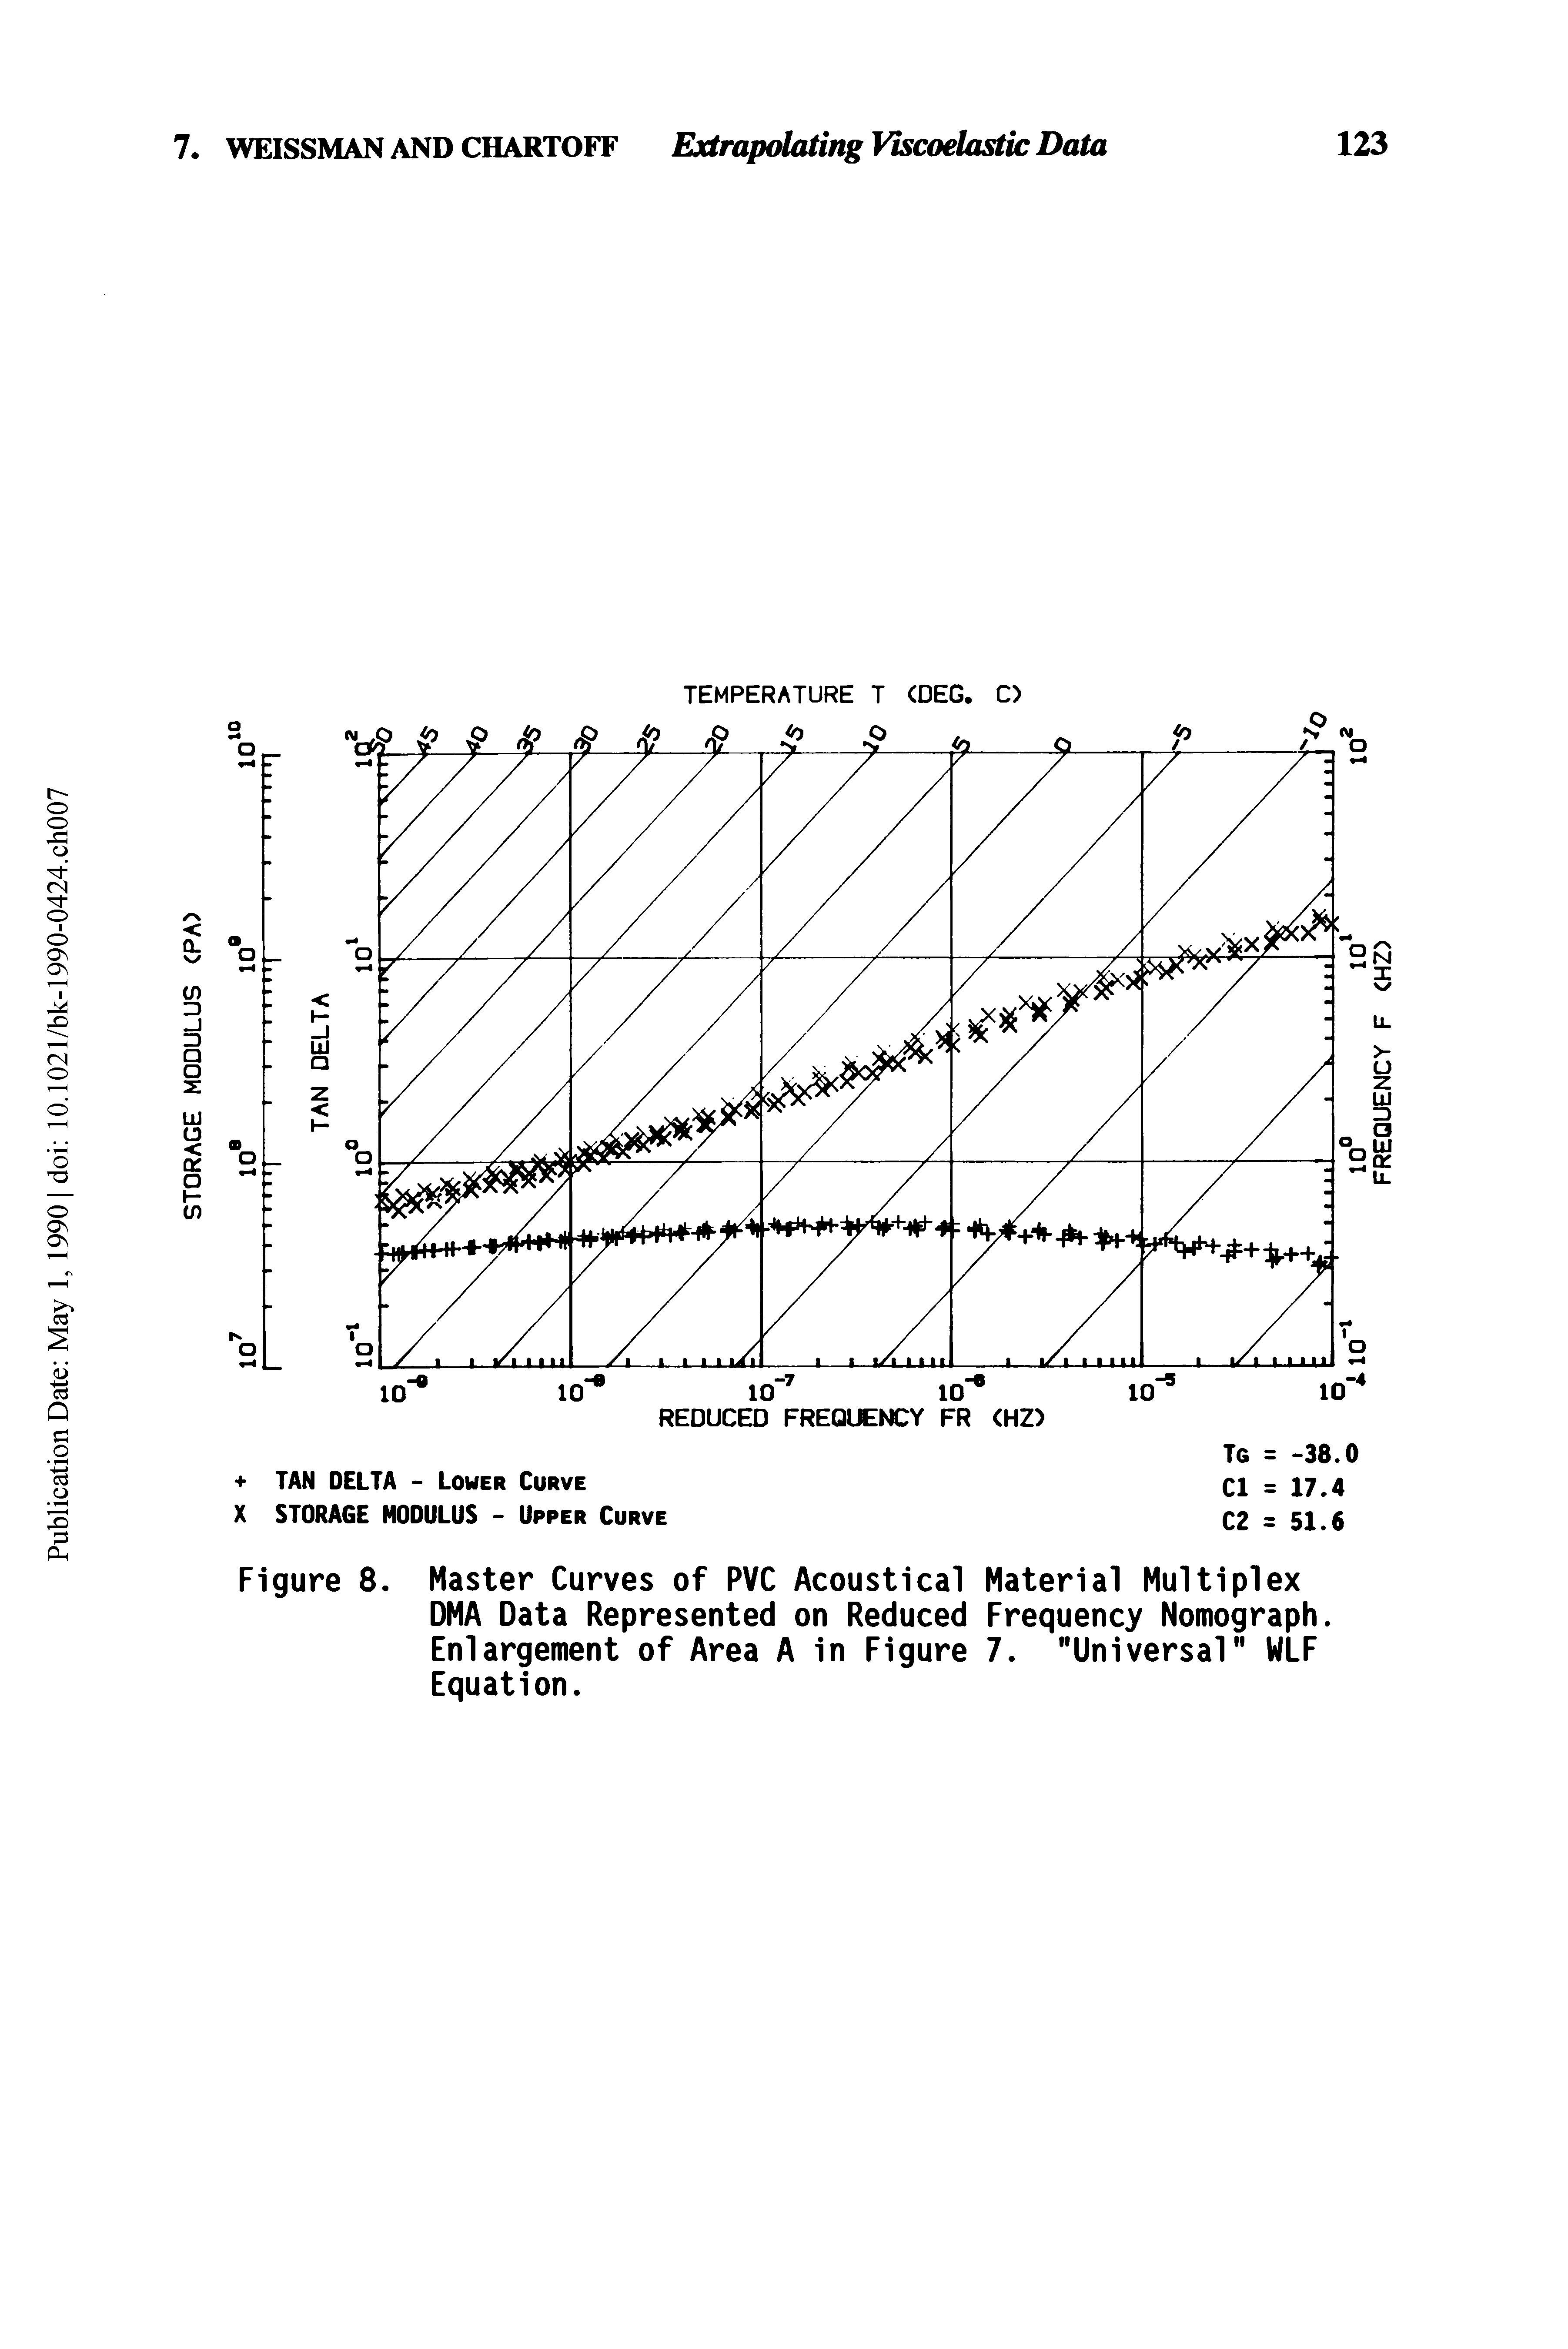 Figure 8. Master Curves of PYC Acoustical Material Multiplex DMA Data RepresentecJ on Reciuced Frequency Nomograph. Enlargement of Area A in Figure 7. "Universal" WLF Equation.